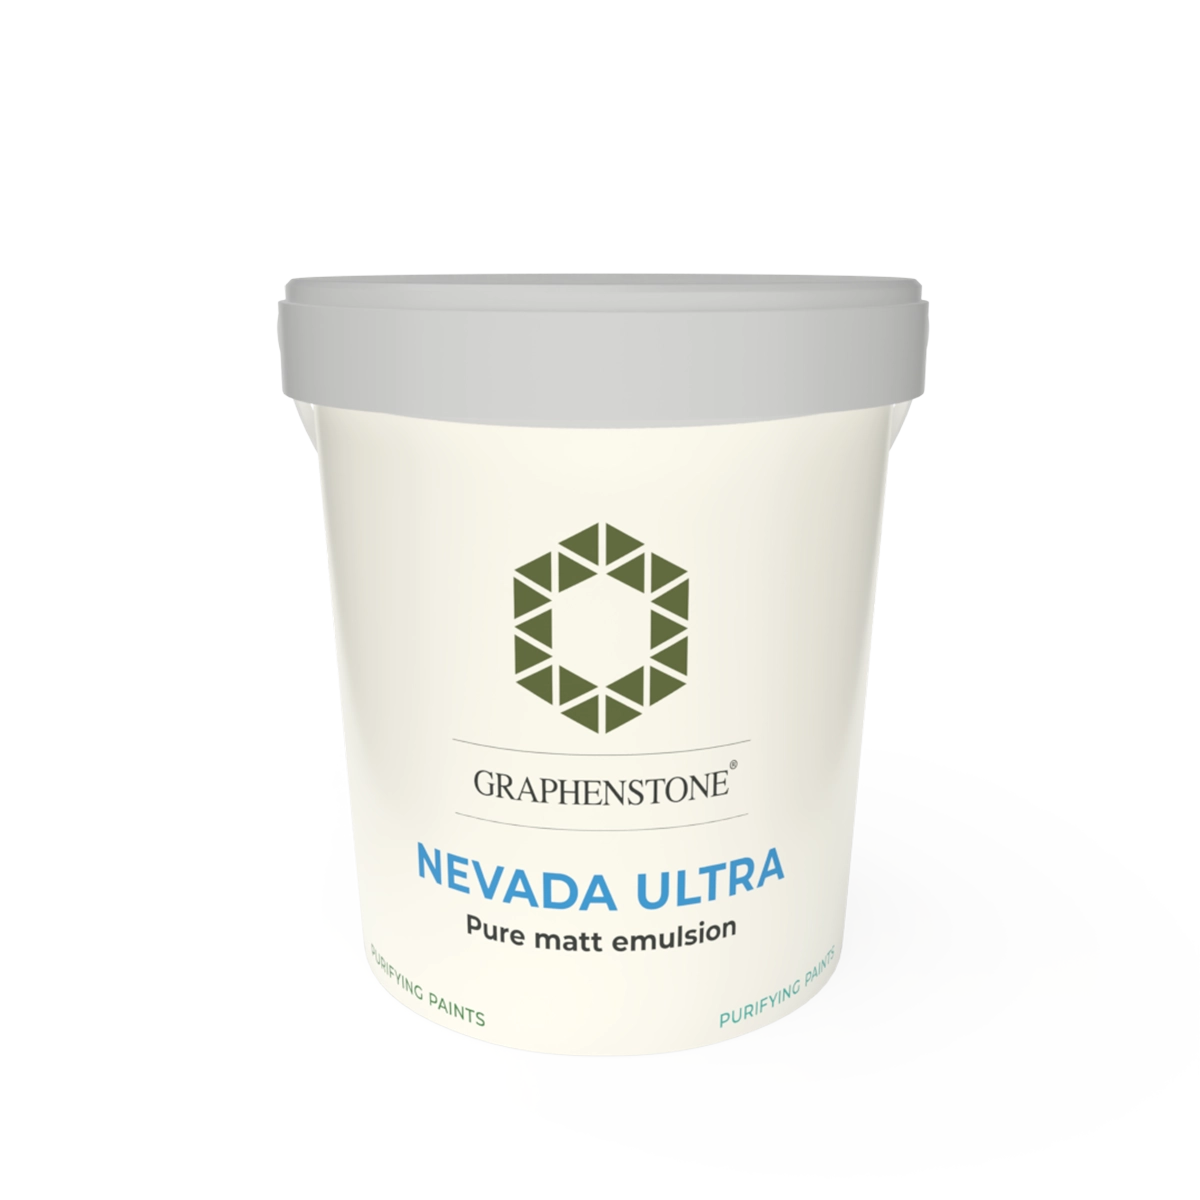 Nevada Ultra White – The ultimate economical eco-friendly trade paint, perfect for ceilings and as 1st coats on new plasters